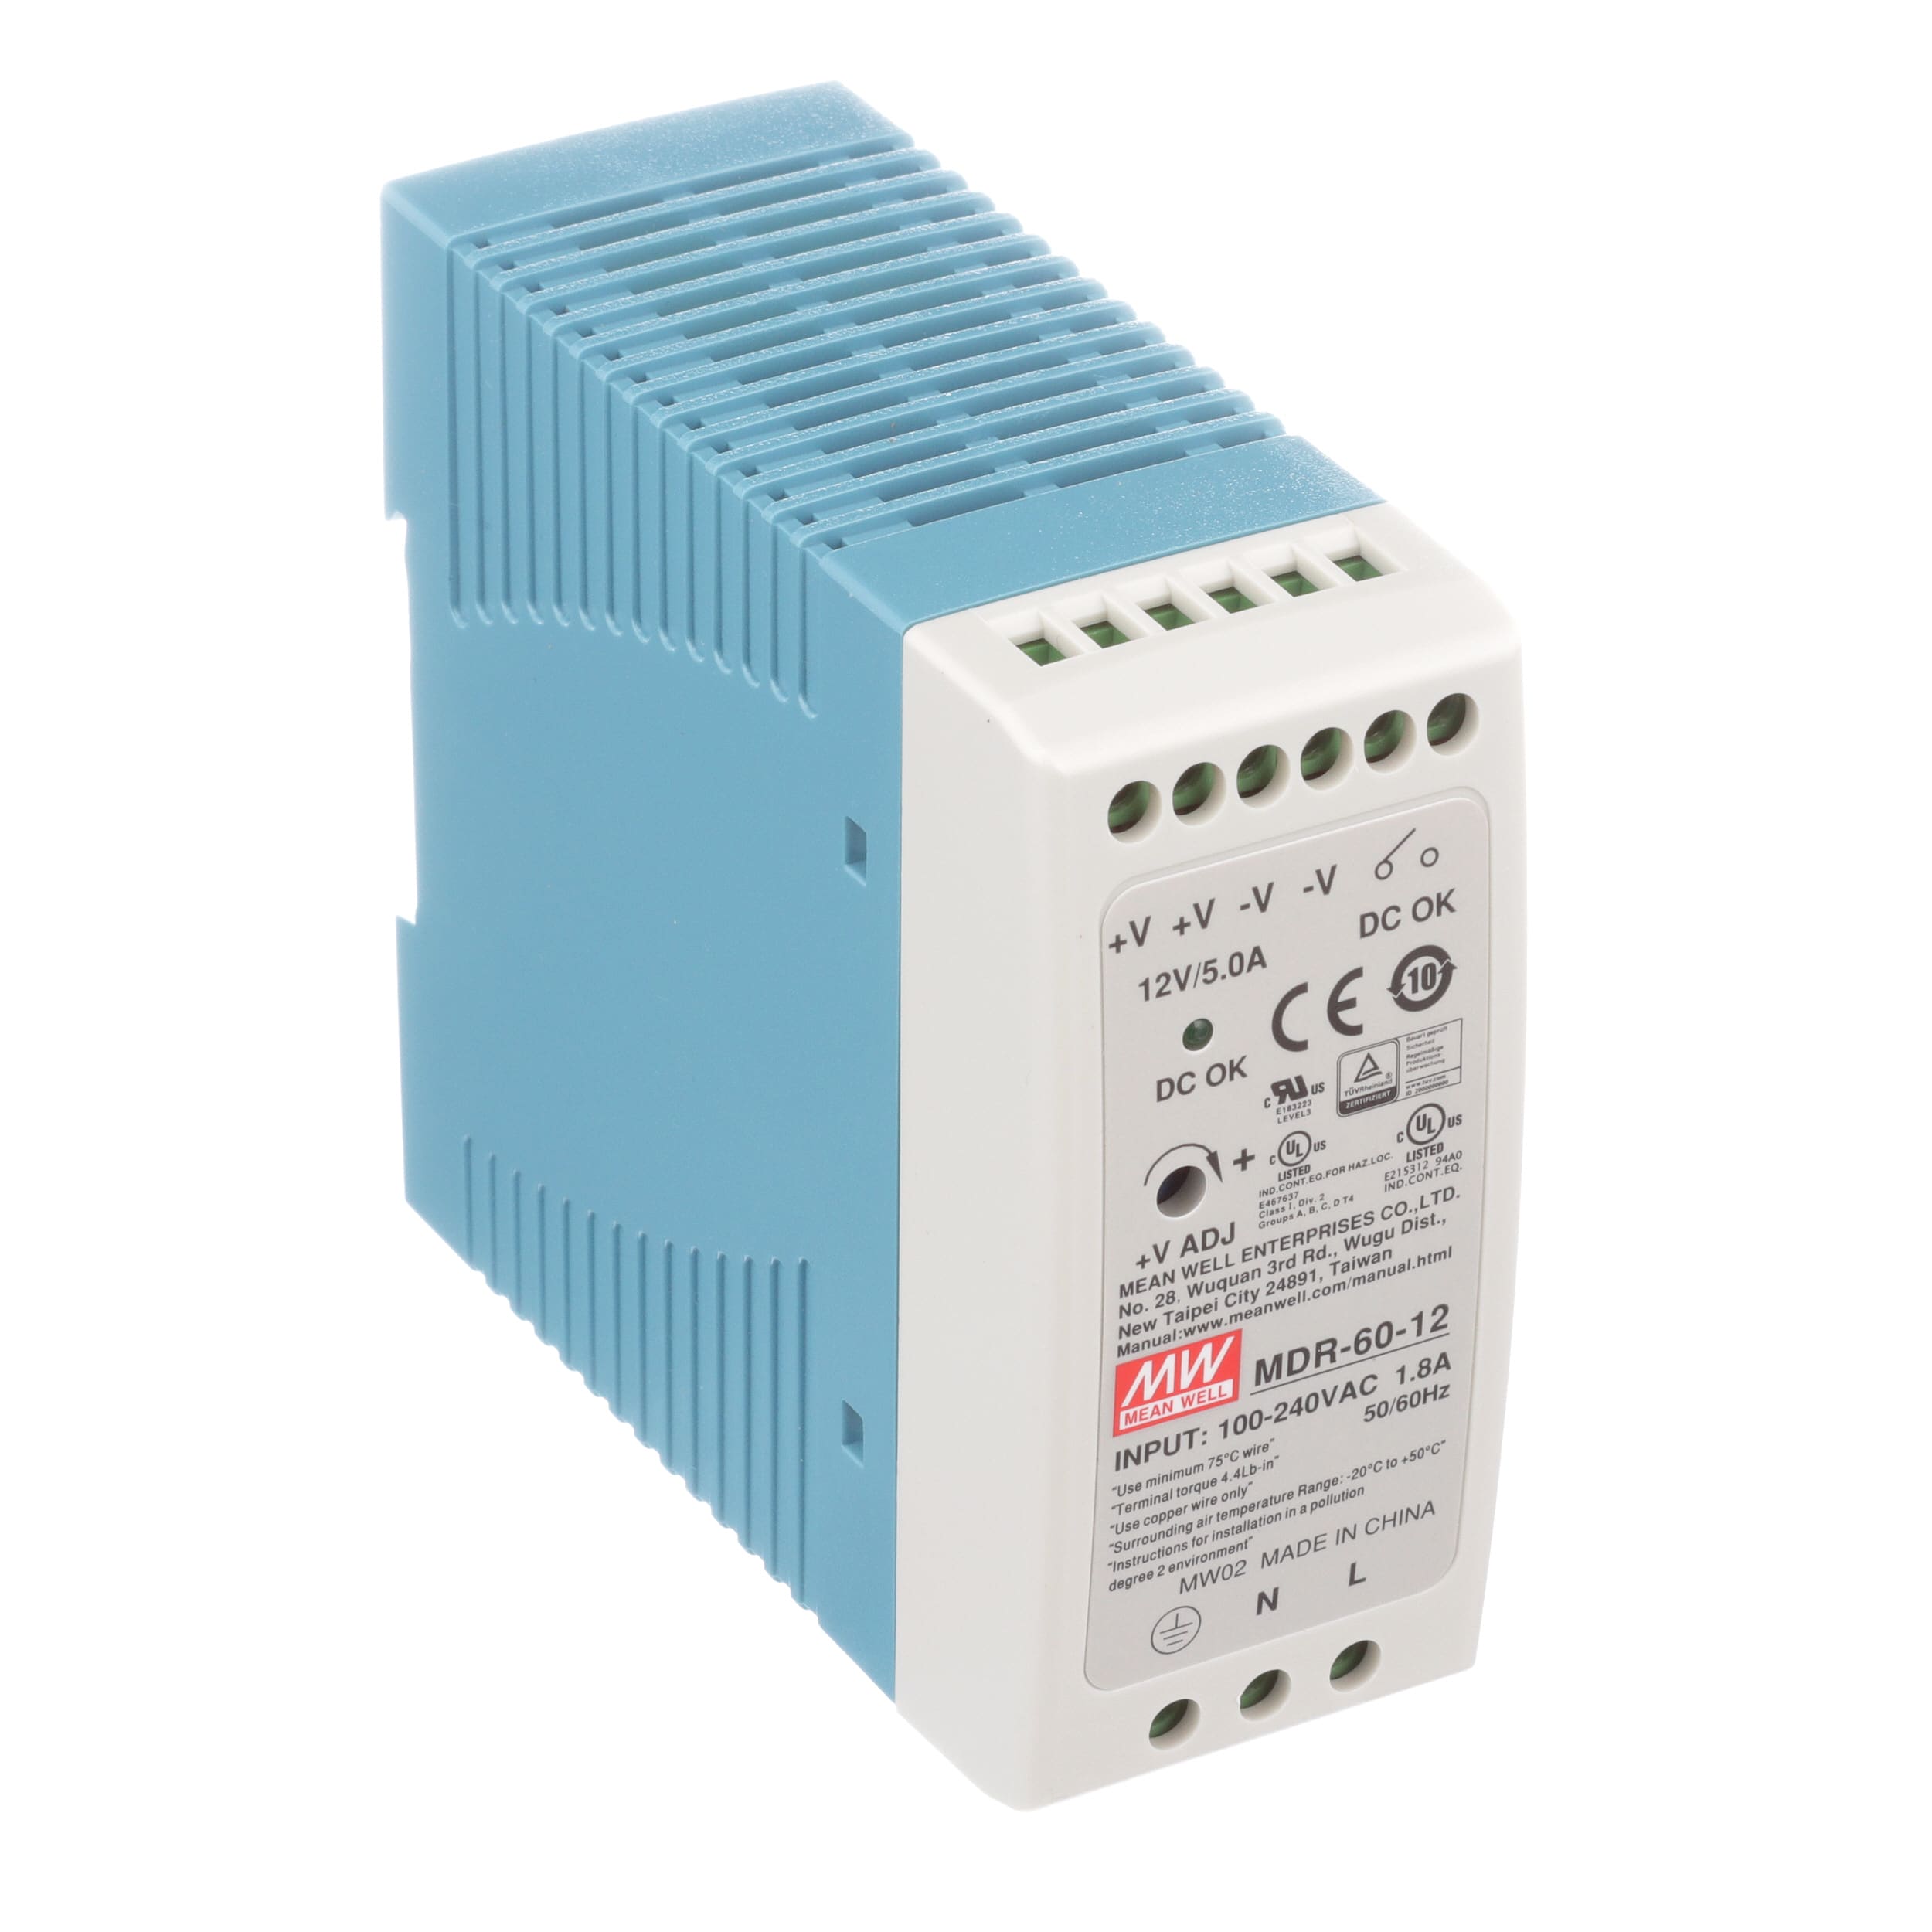 Details about   MW MDR-60-12 AC to DC Power Supplies 